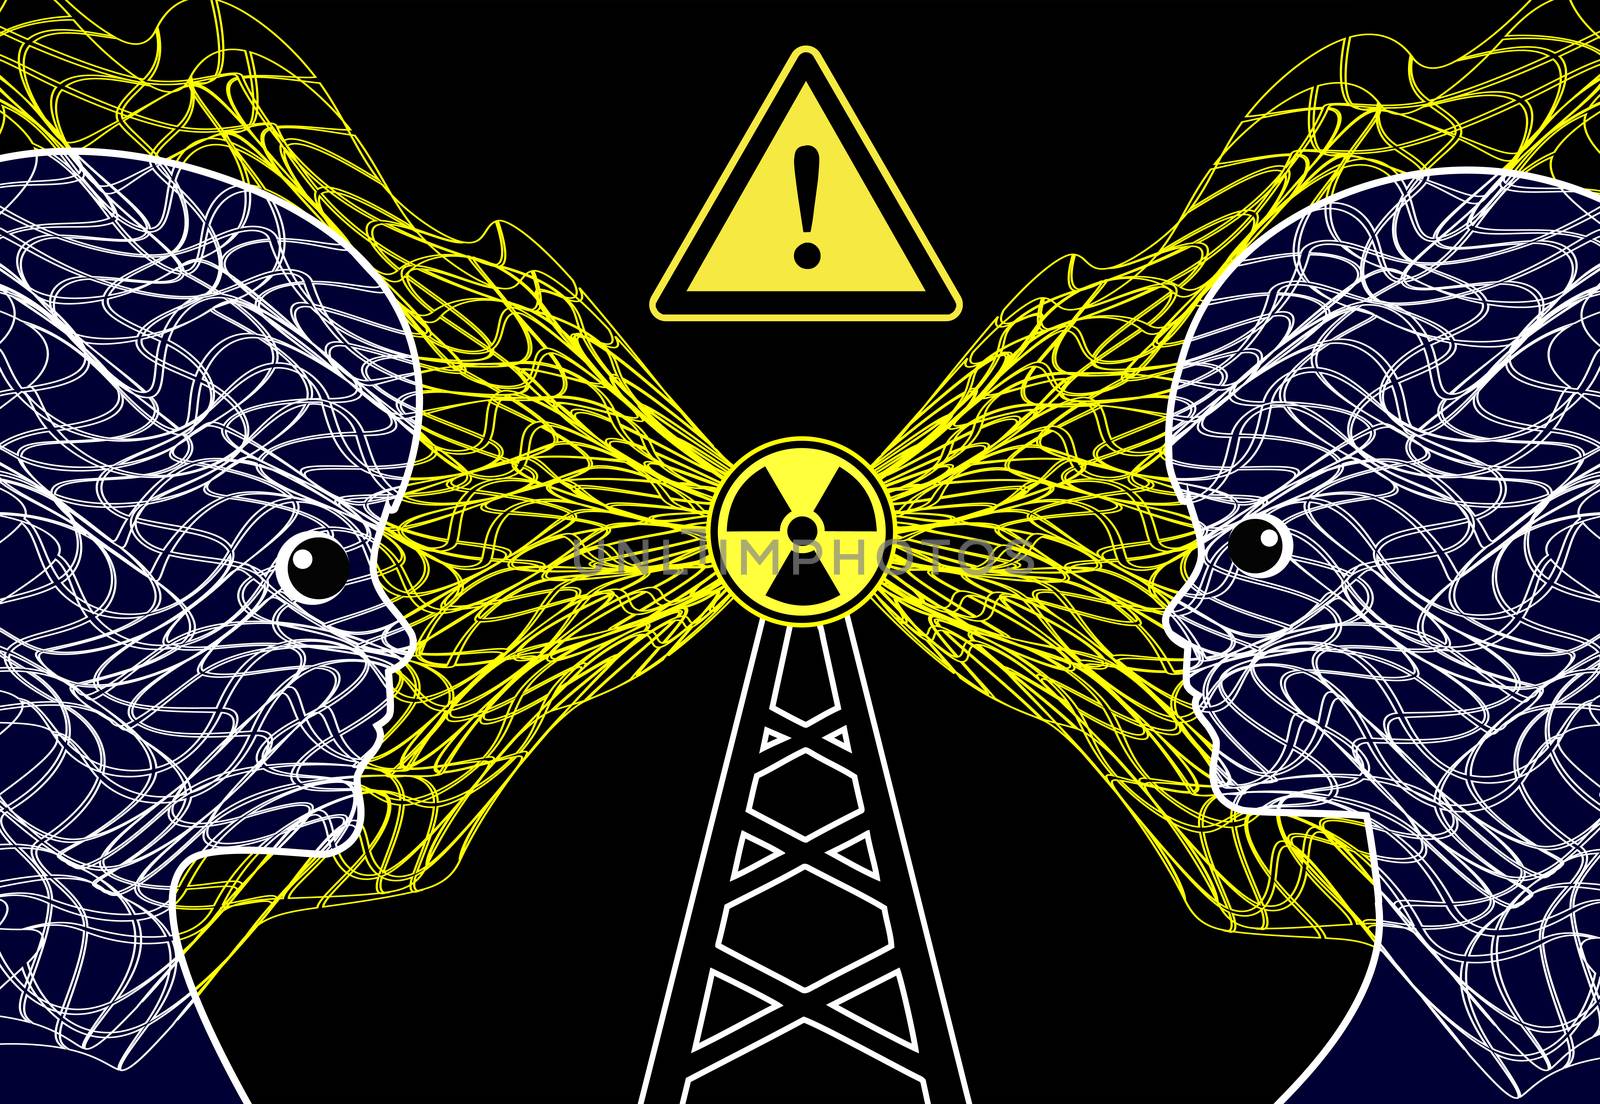 The radiation of cellular phone or radio towers can harm children